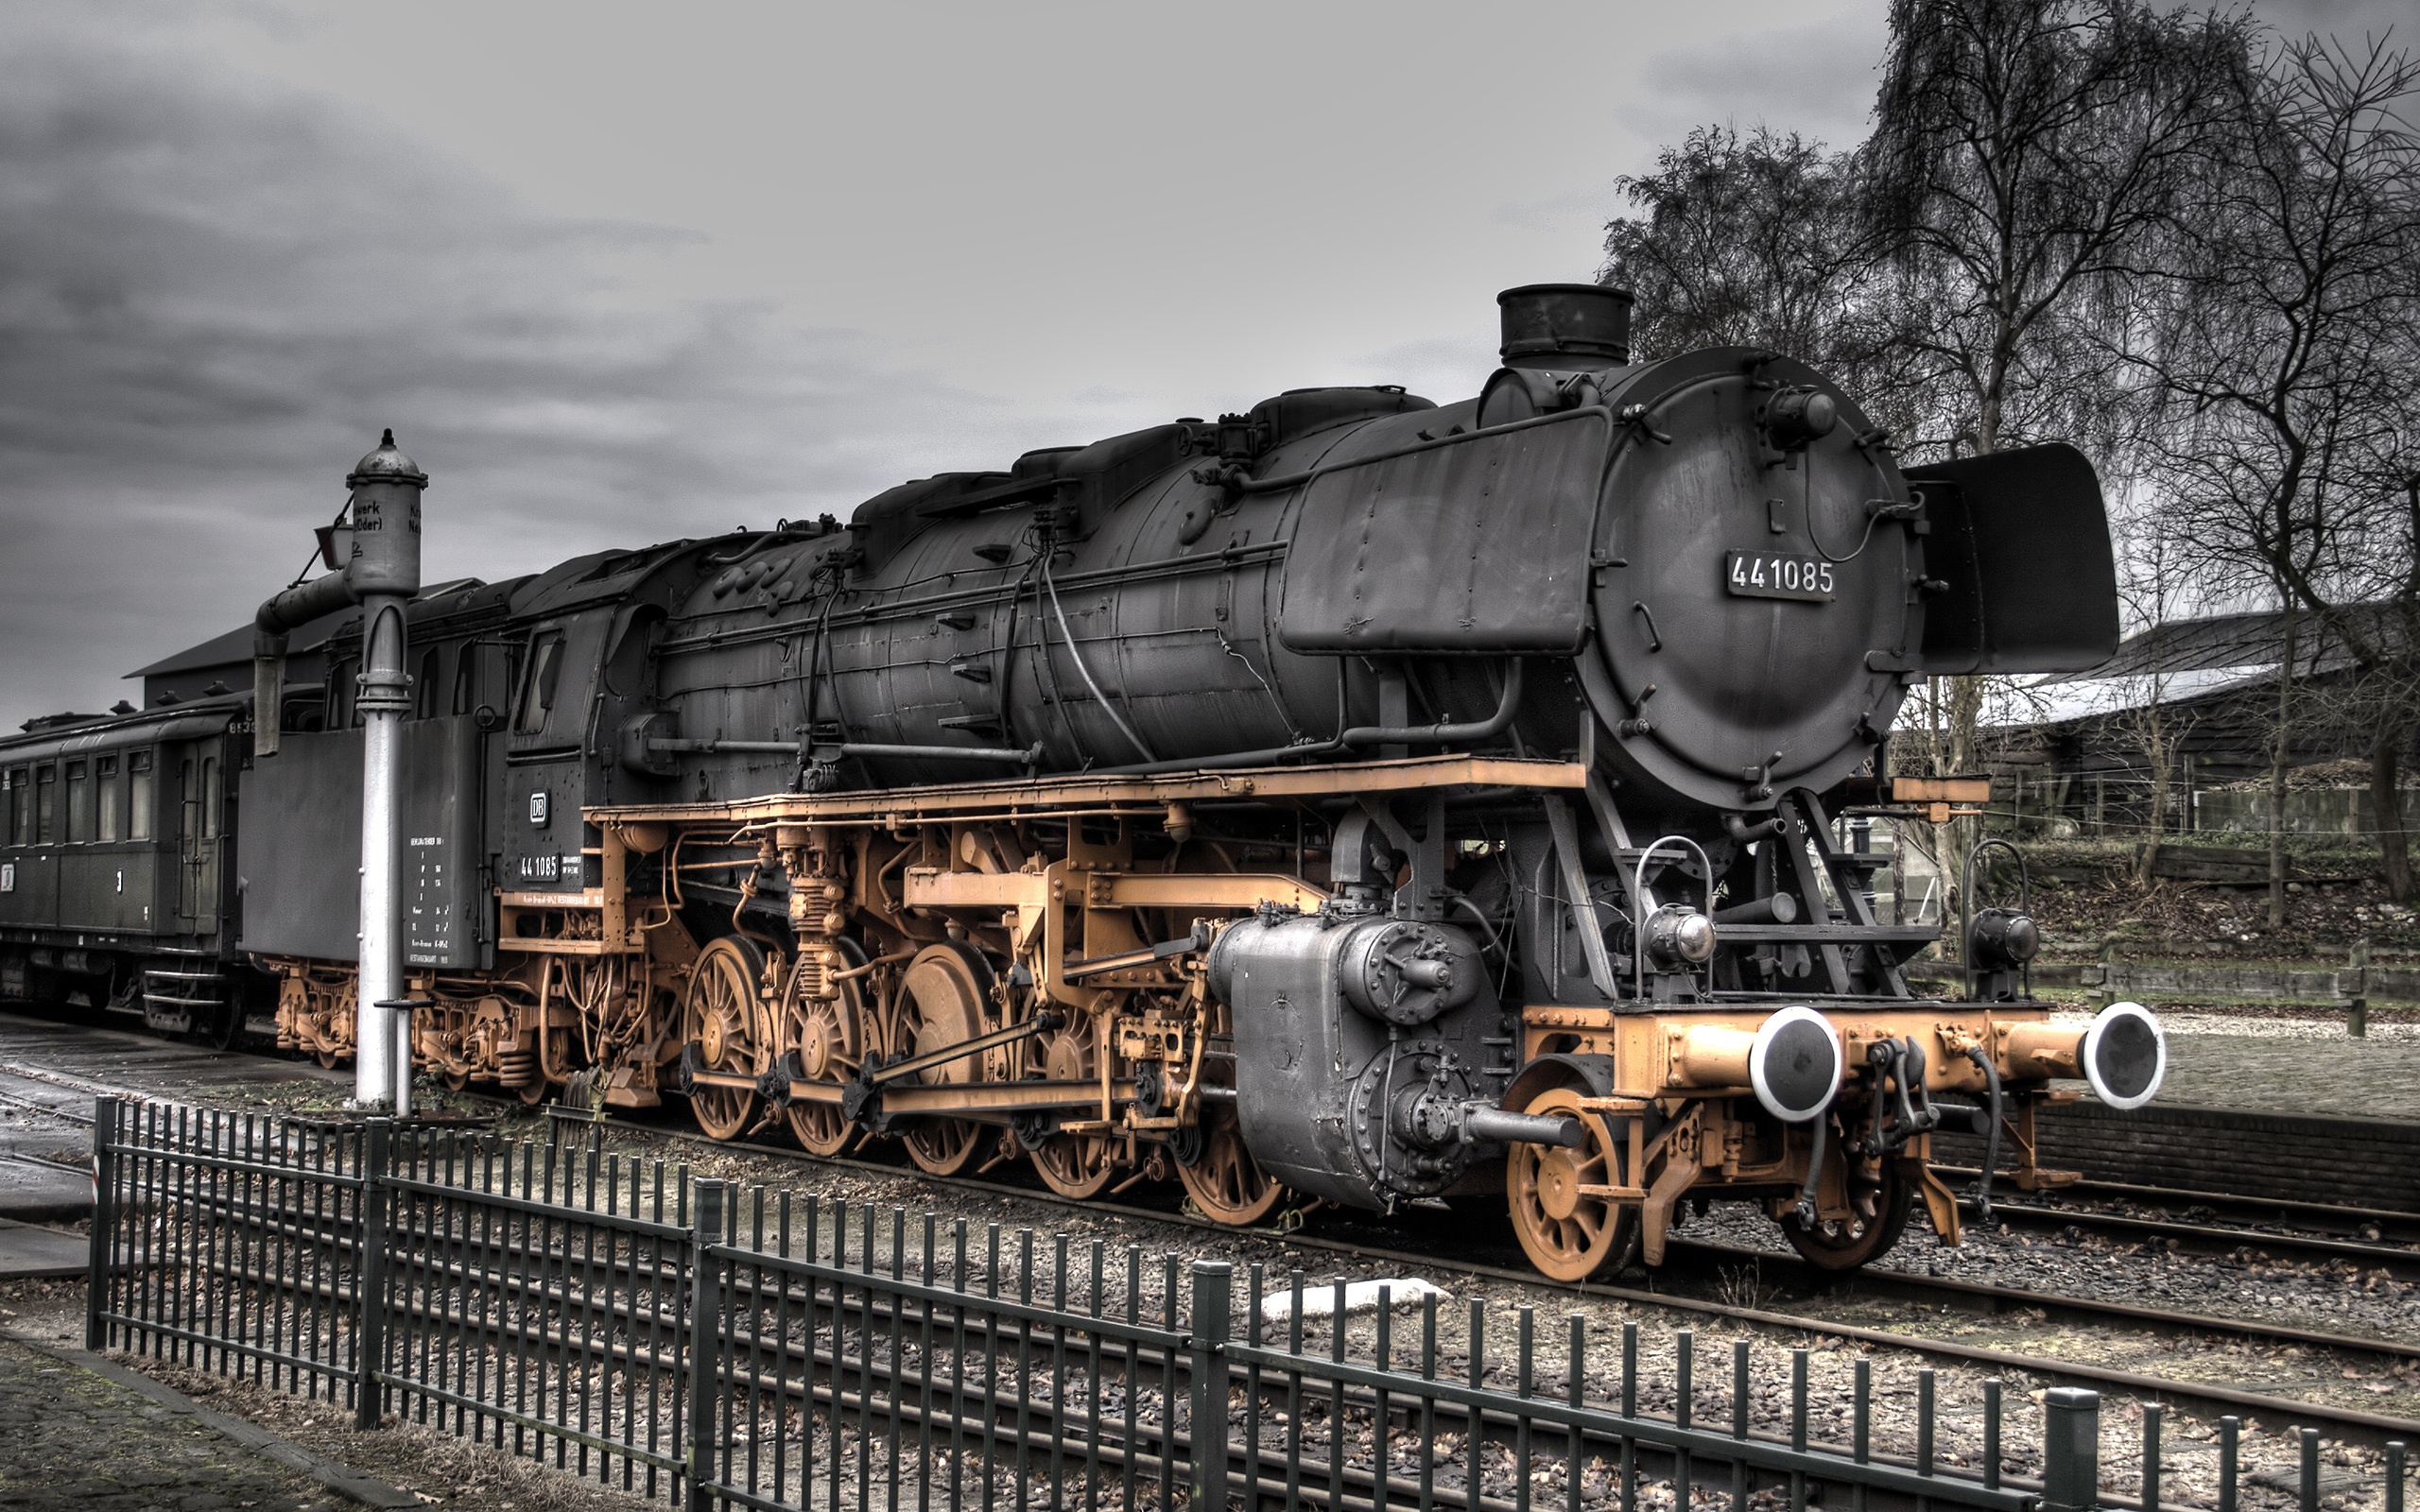 Beautifully restored steam train locomotive emerging from a tunnel, against a vibrant HDR background.